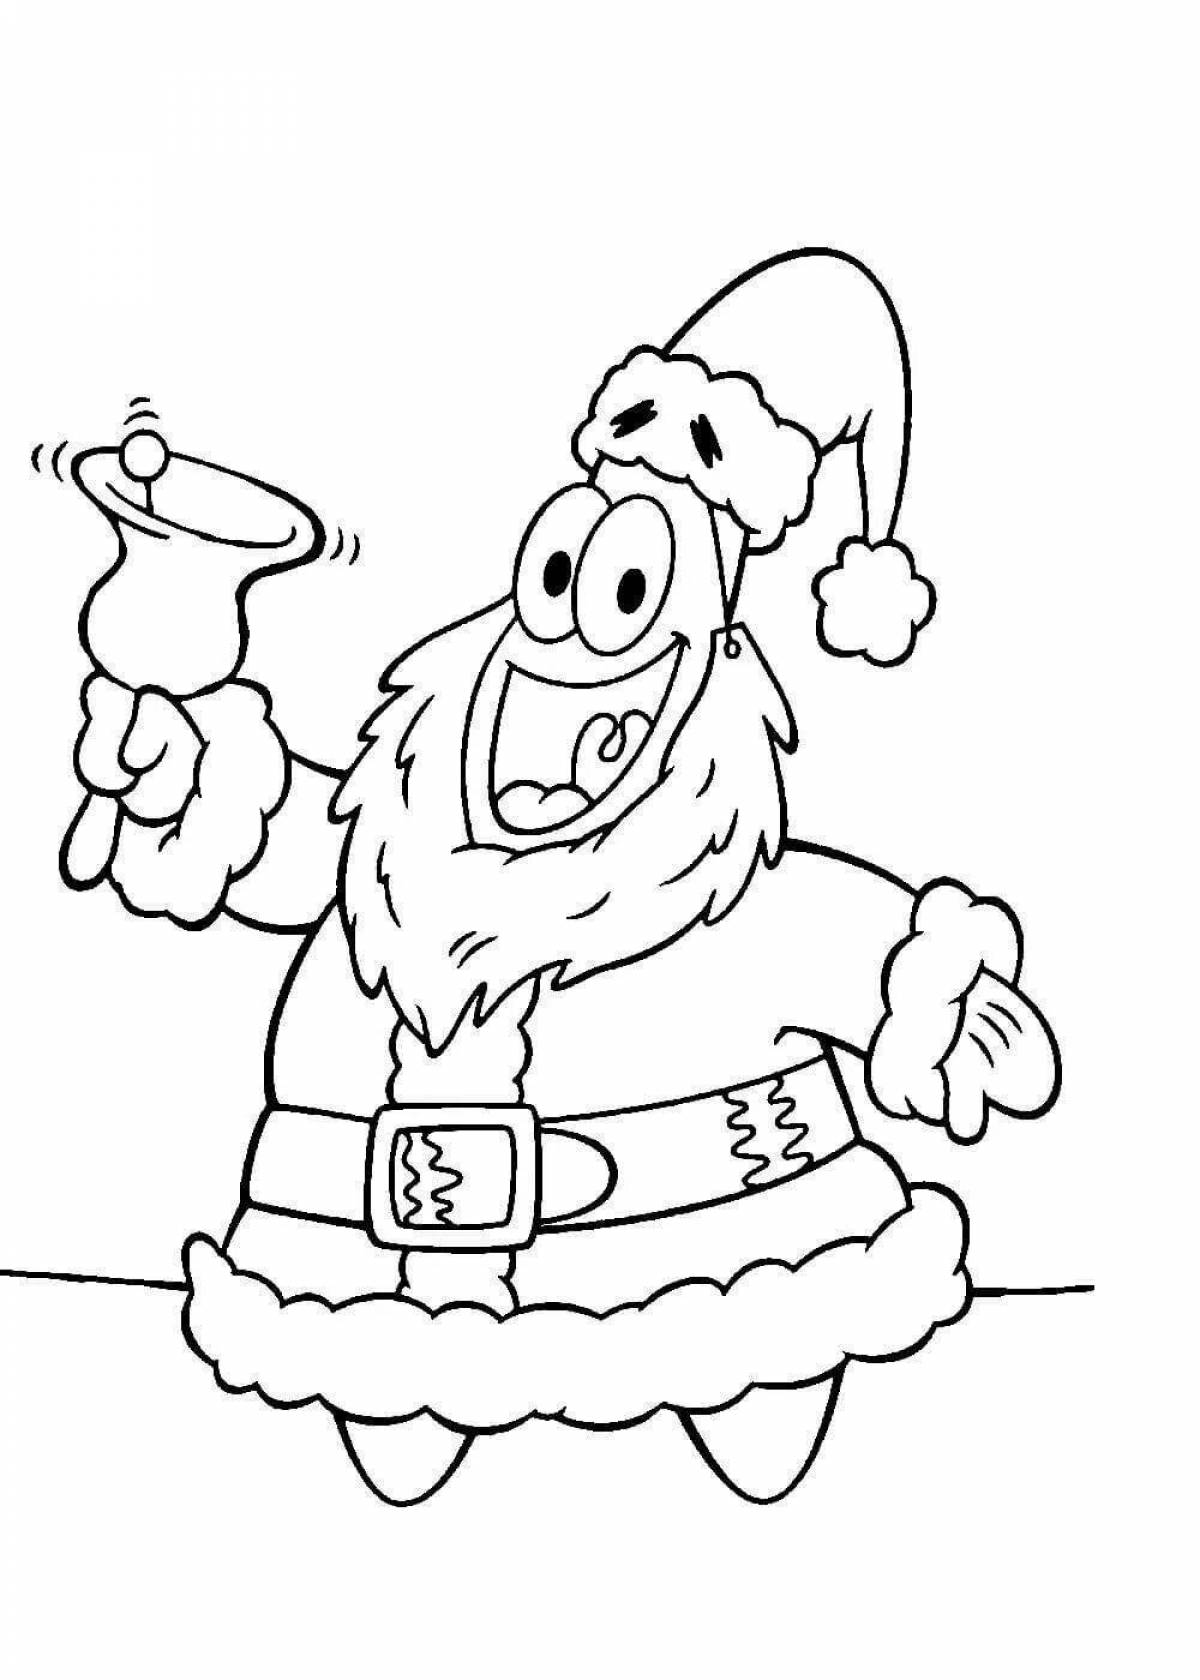 Coloring book with colorful Christmas characters